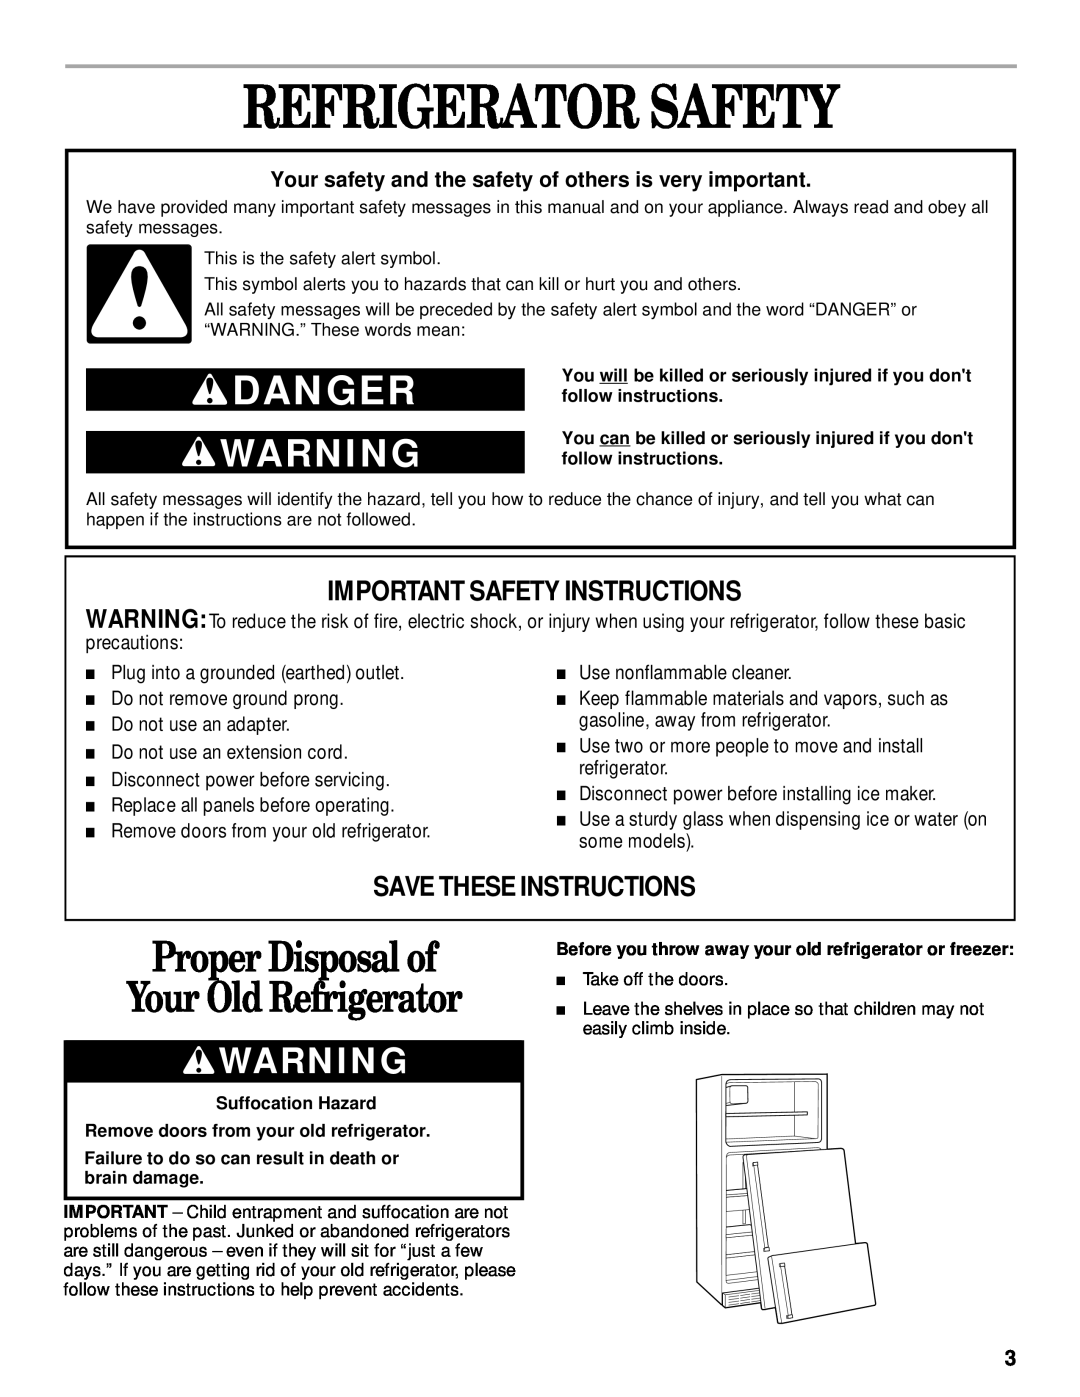 Whirlpool 3VET16GKGW01 Refrigerator Safety, Proper Disposal of Your Old Refrigerator, Danger, Save These Instructions 